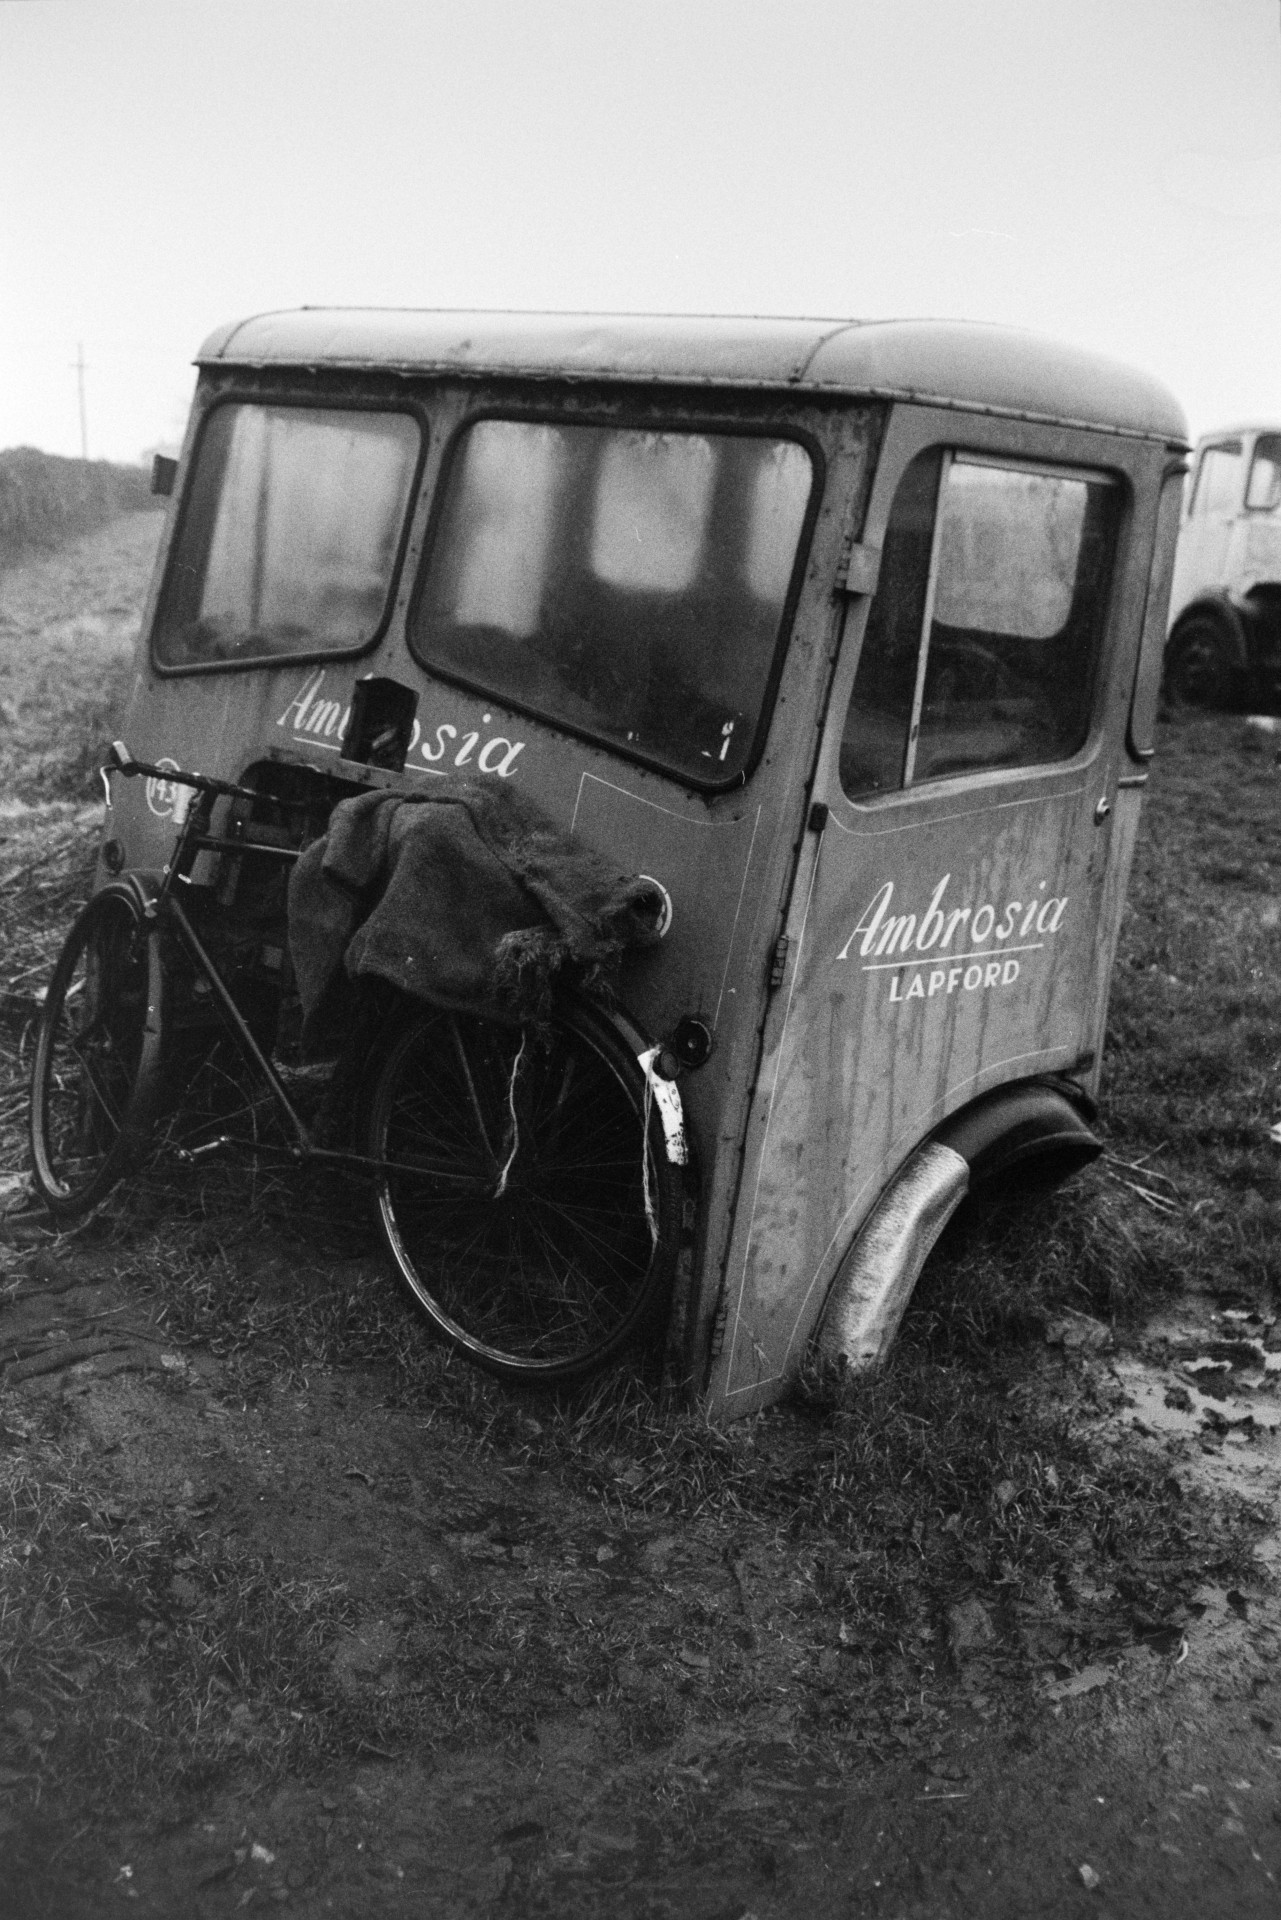 A bicycle propped next to an old stripped down Ambrosia lorry cab.